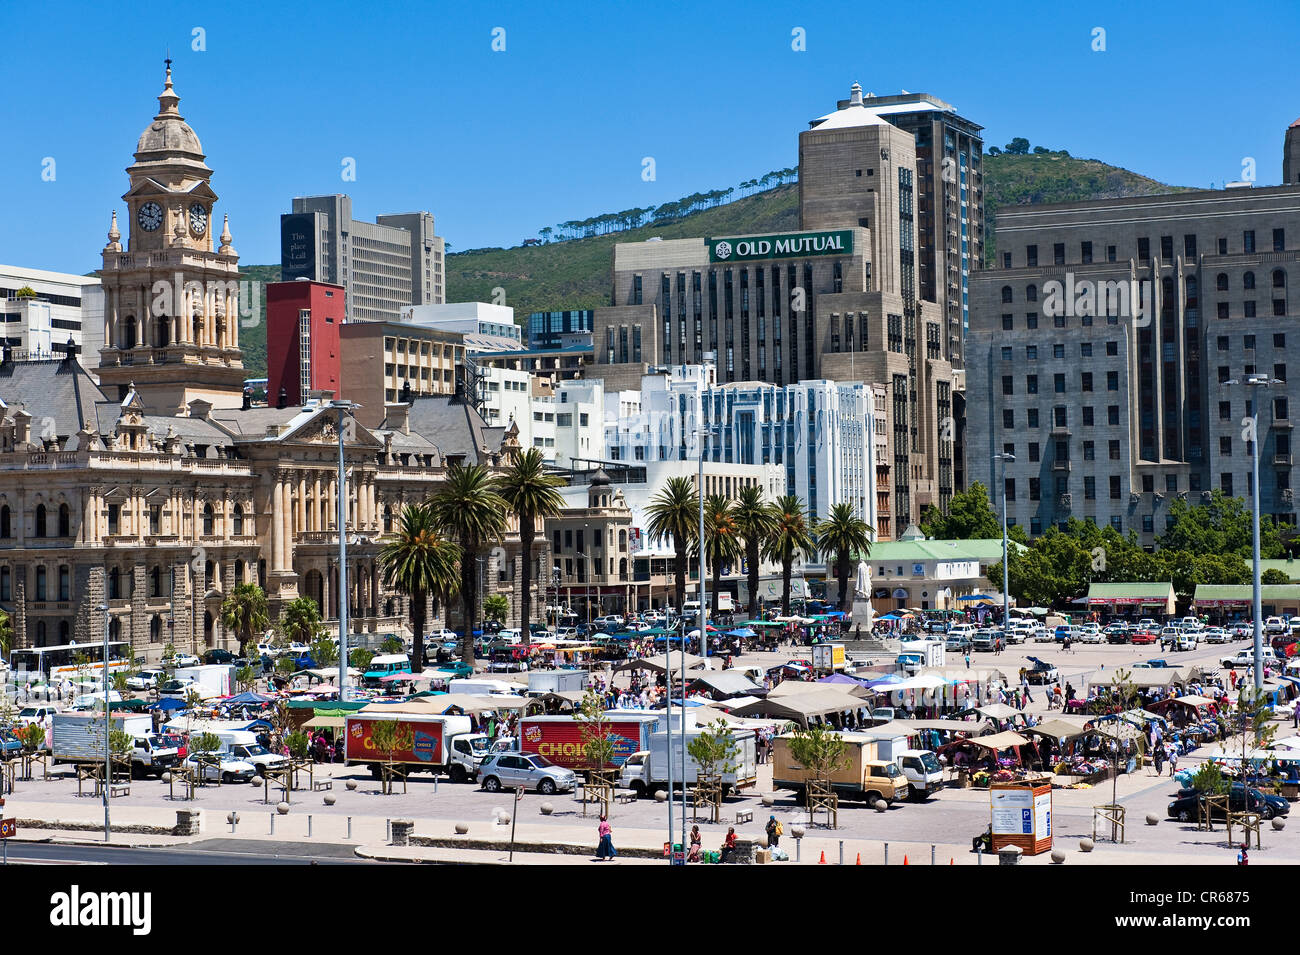 https://c8.alamy.com/comp/CR6875/south-africa-western-cape-cape-town-the-district-of-city-bowl-square-CR6875.jpg